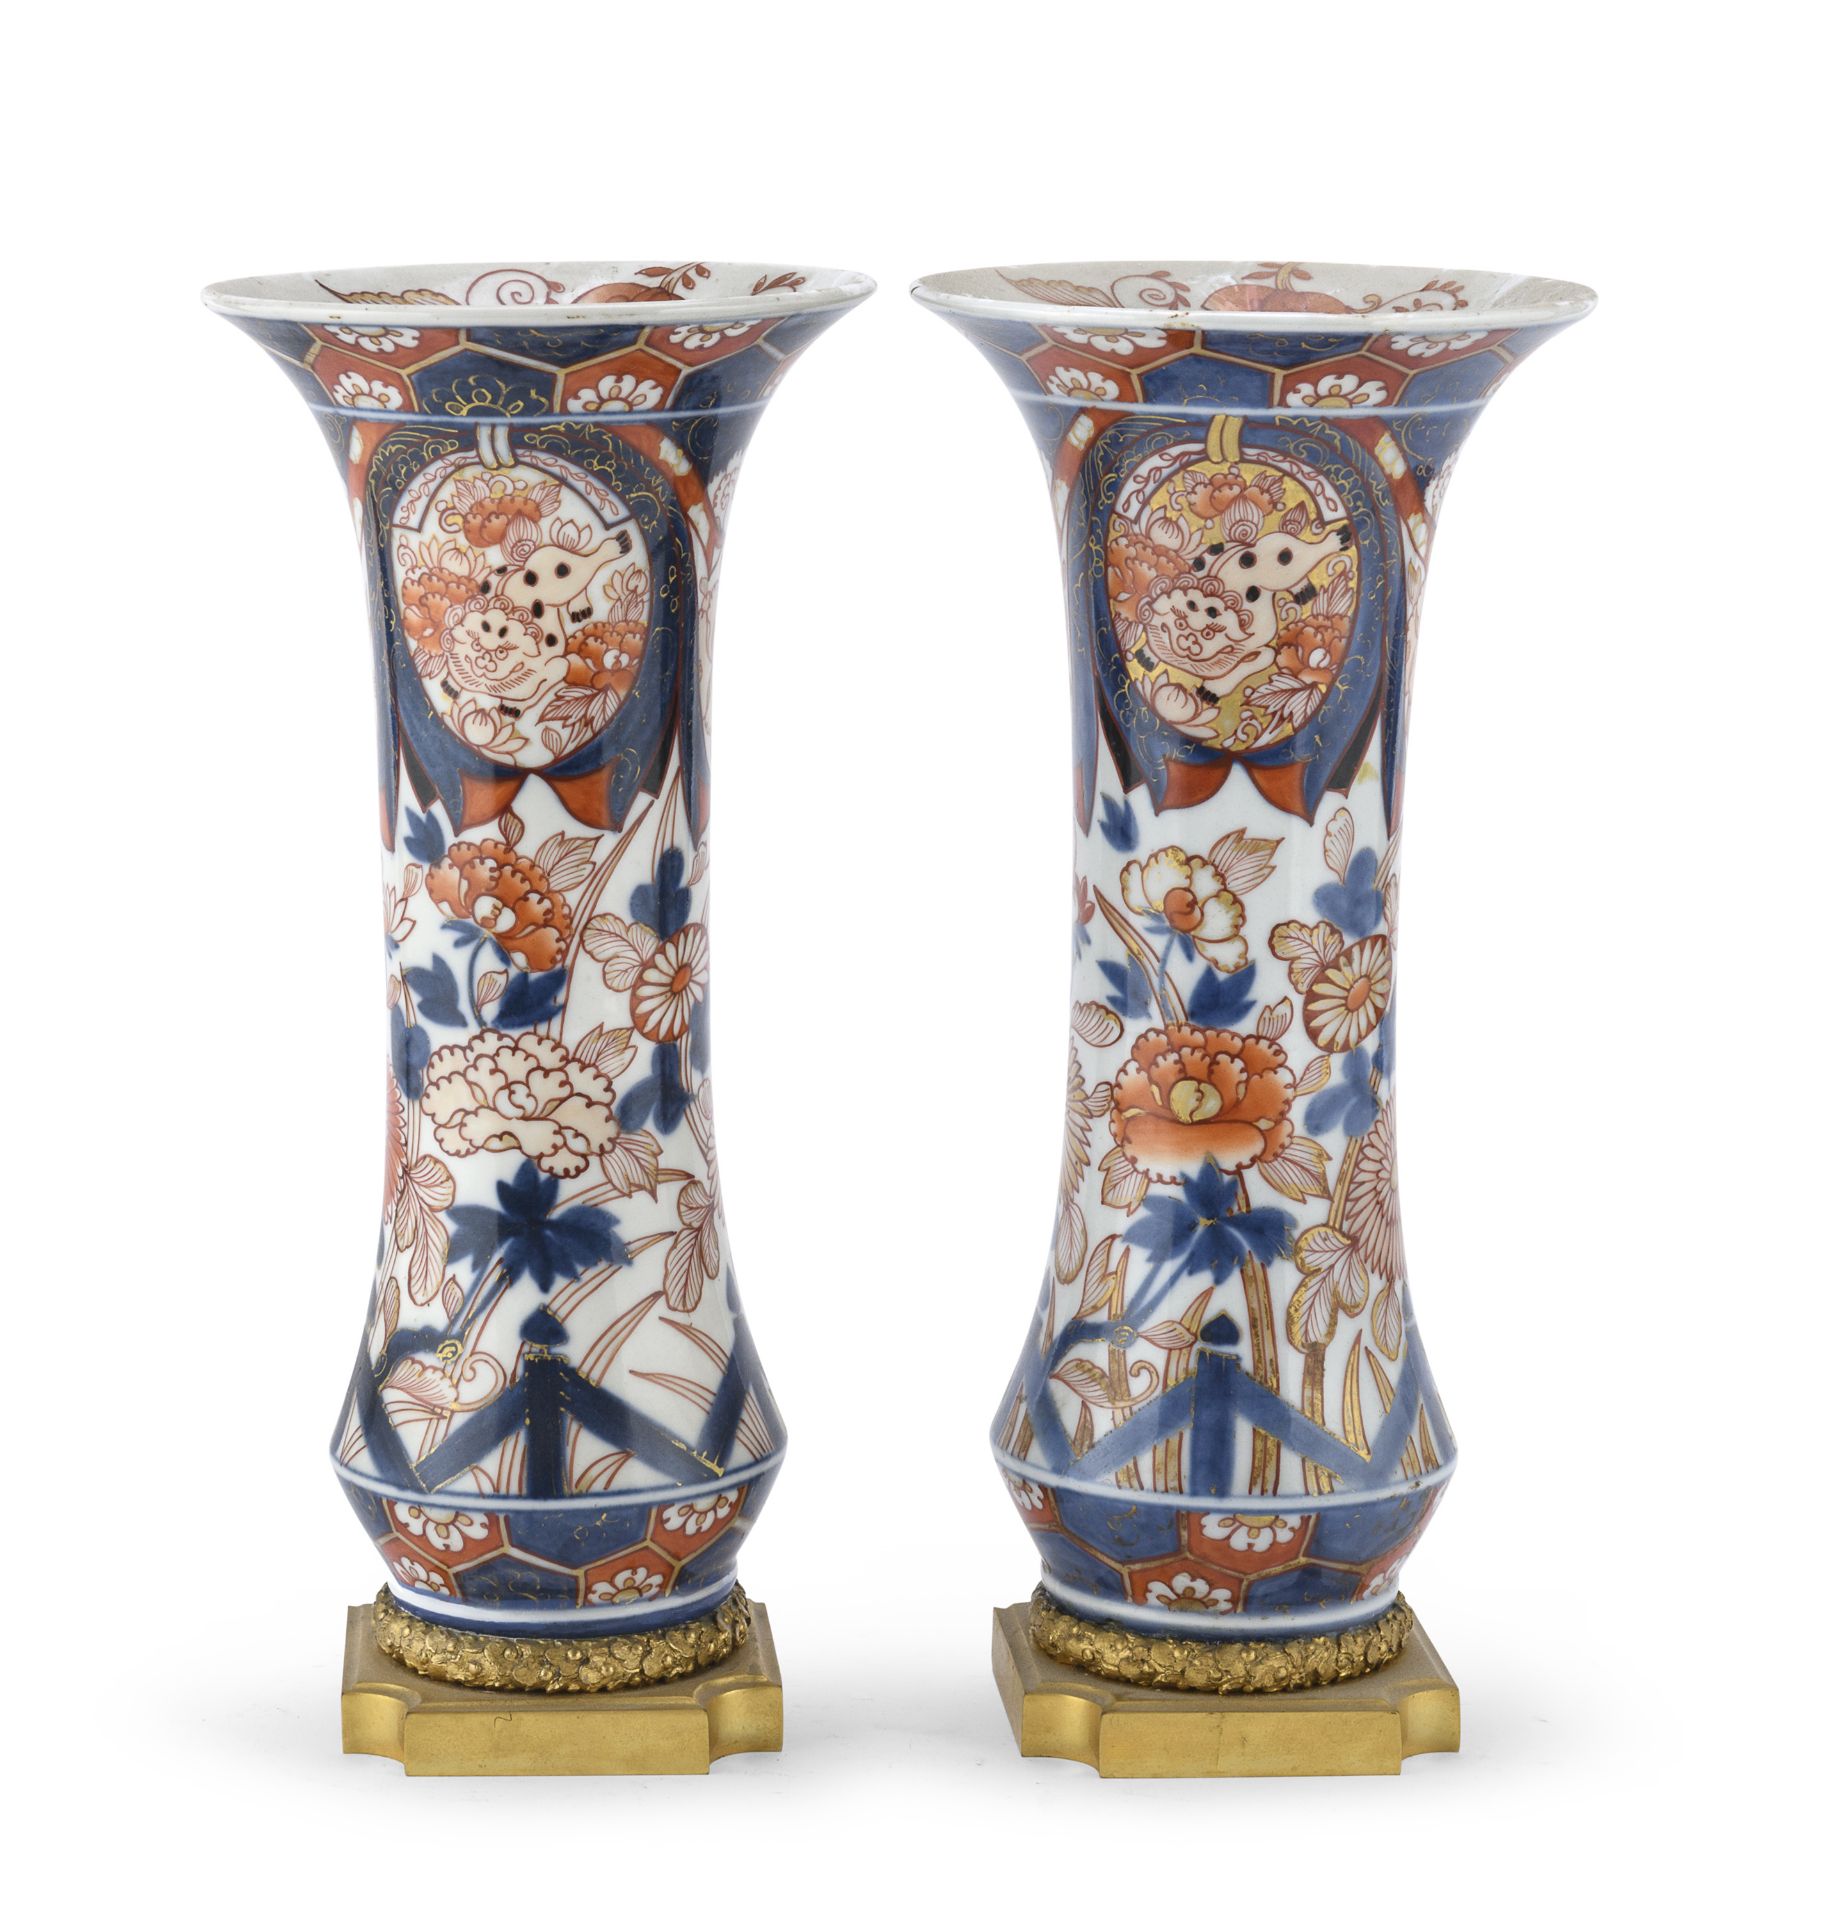 PAIR OF POLYCHROME AND GOLD ENAMELED PORCELAIN VASES JAPAN SECOND HALF 18TH CENTURY